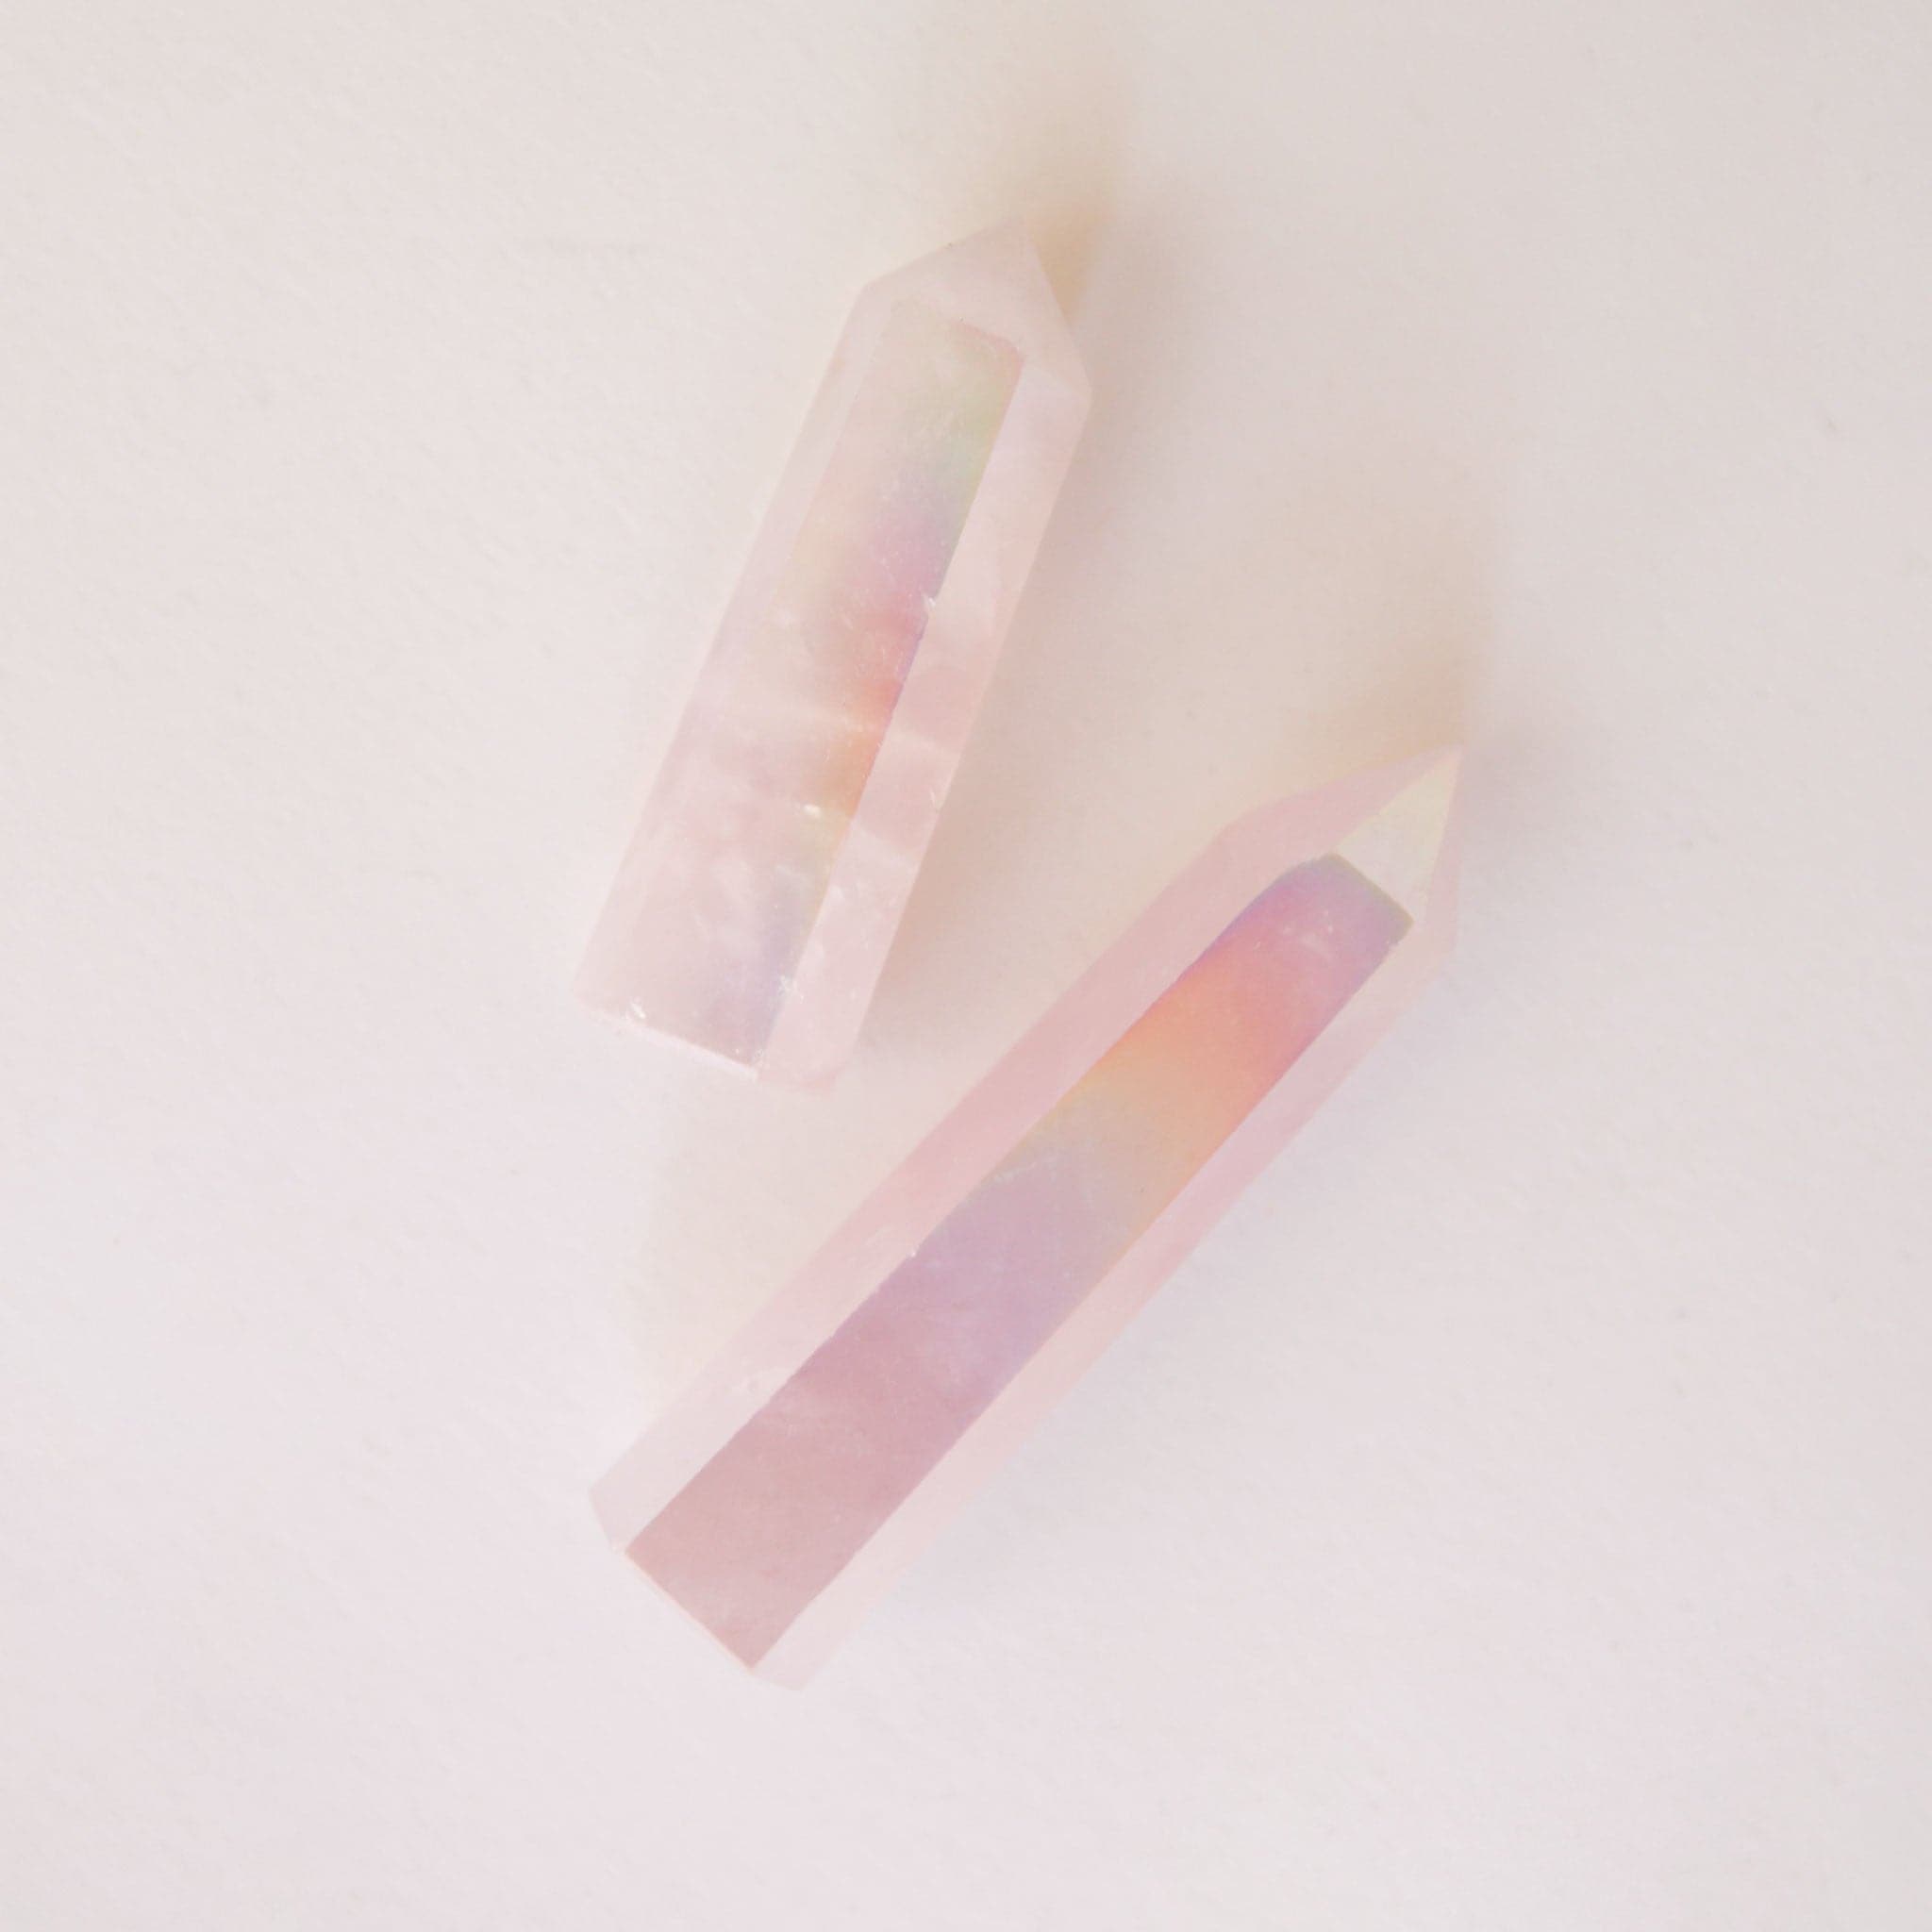 A rose quartz crystal with an iridescent quality to it. 